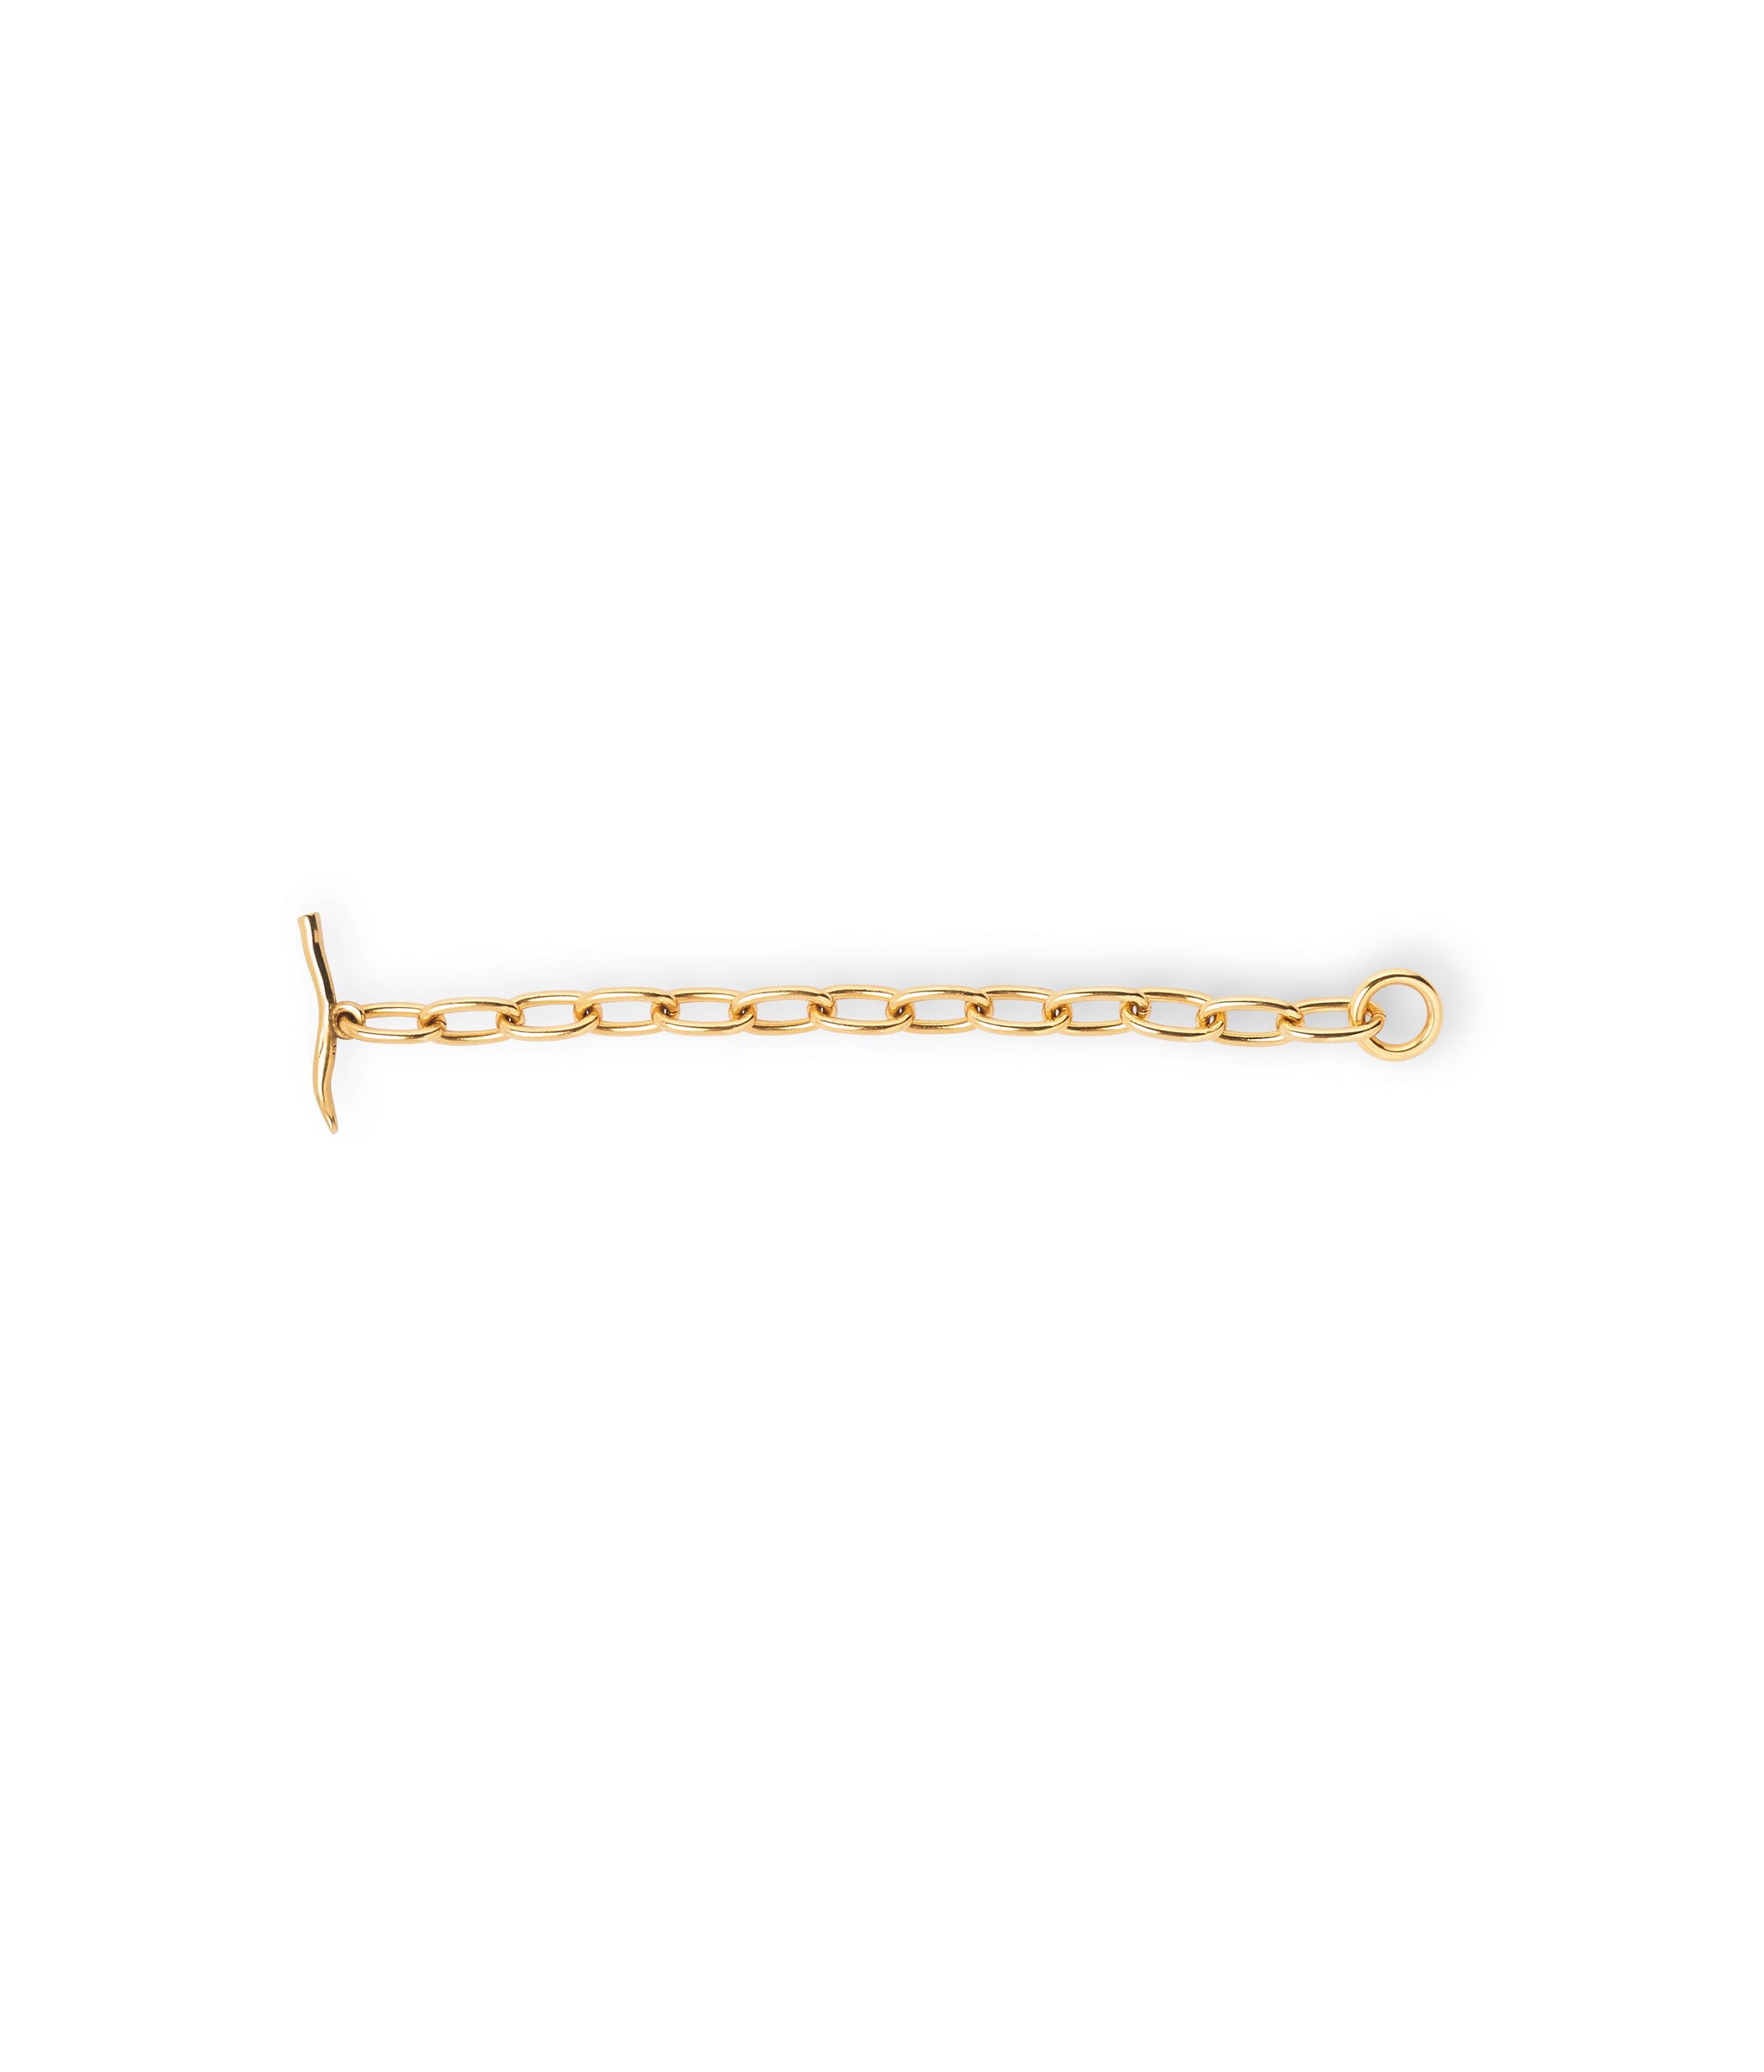 4.25" Gold Toggle Extender. Gold-plated brass long link chain with toggle closure.